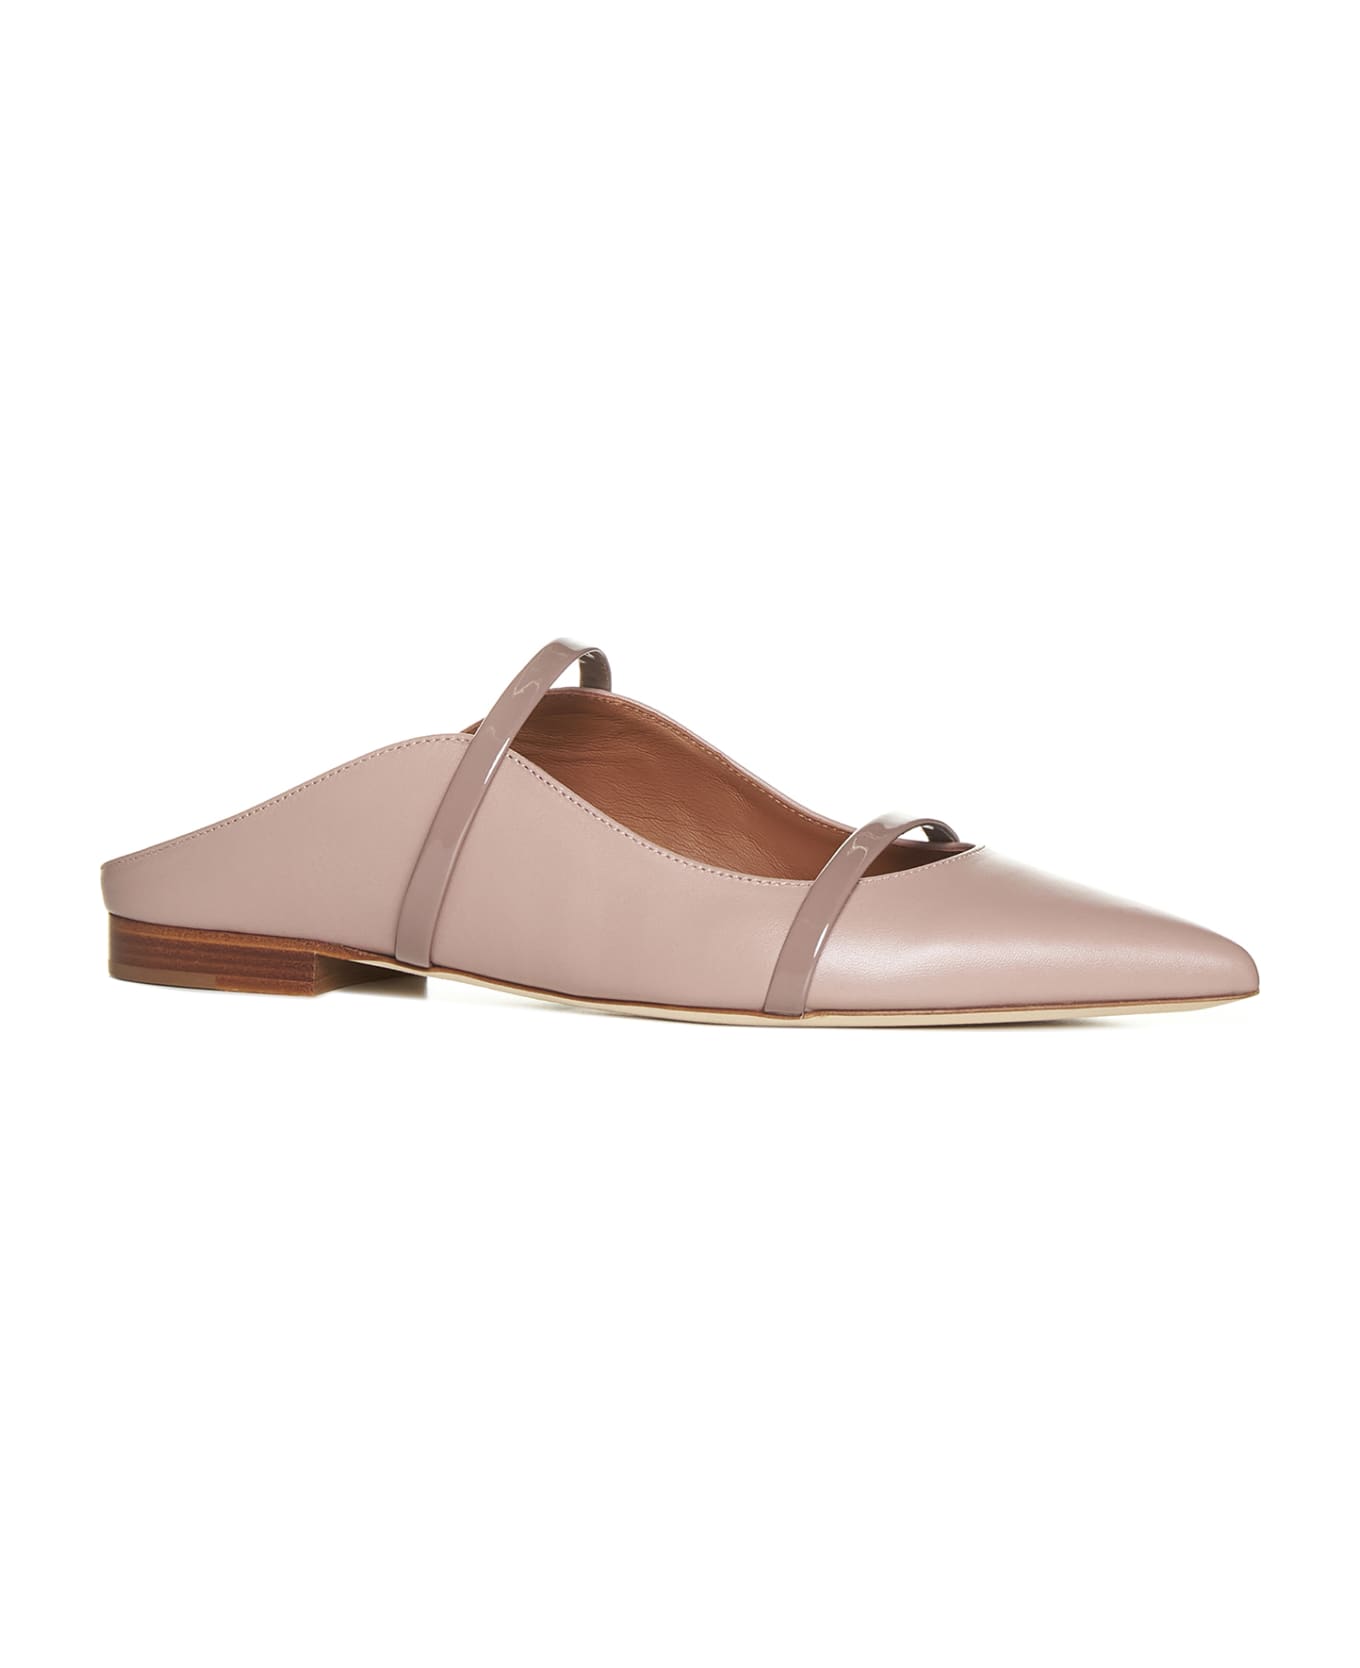 Malone Souliers Flat Shoes - Dove/dove